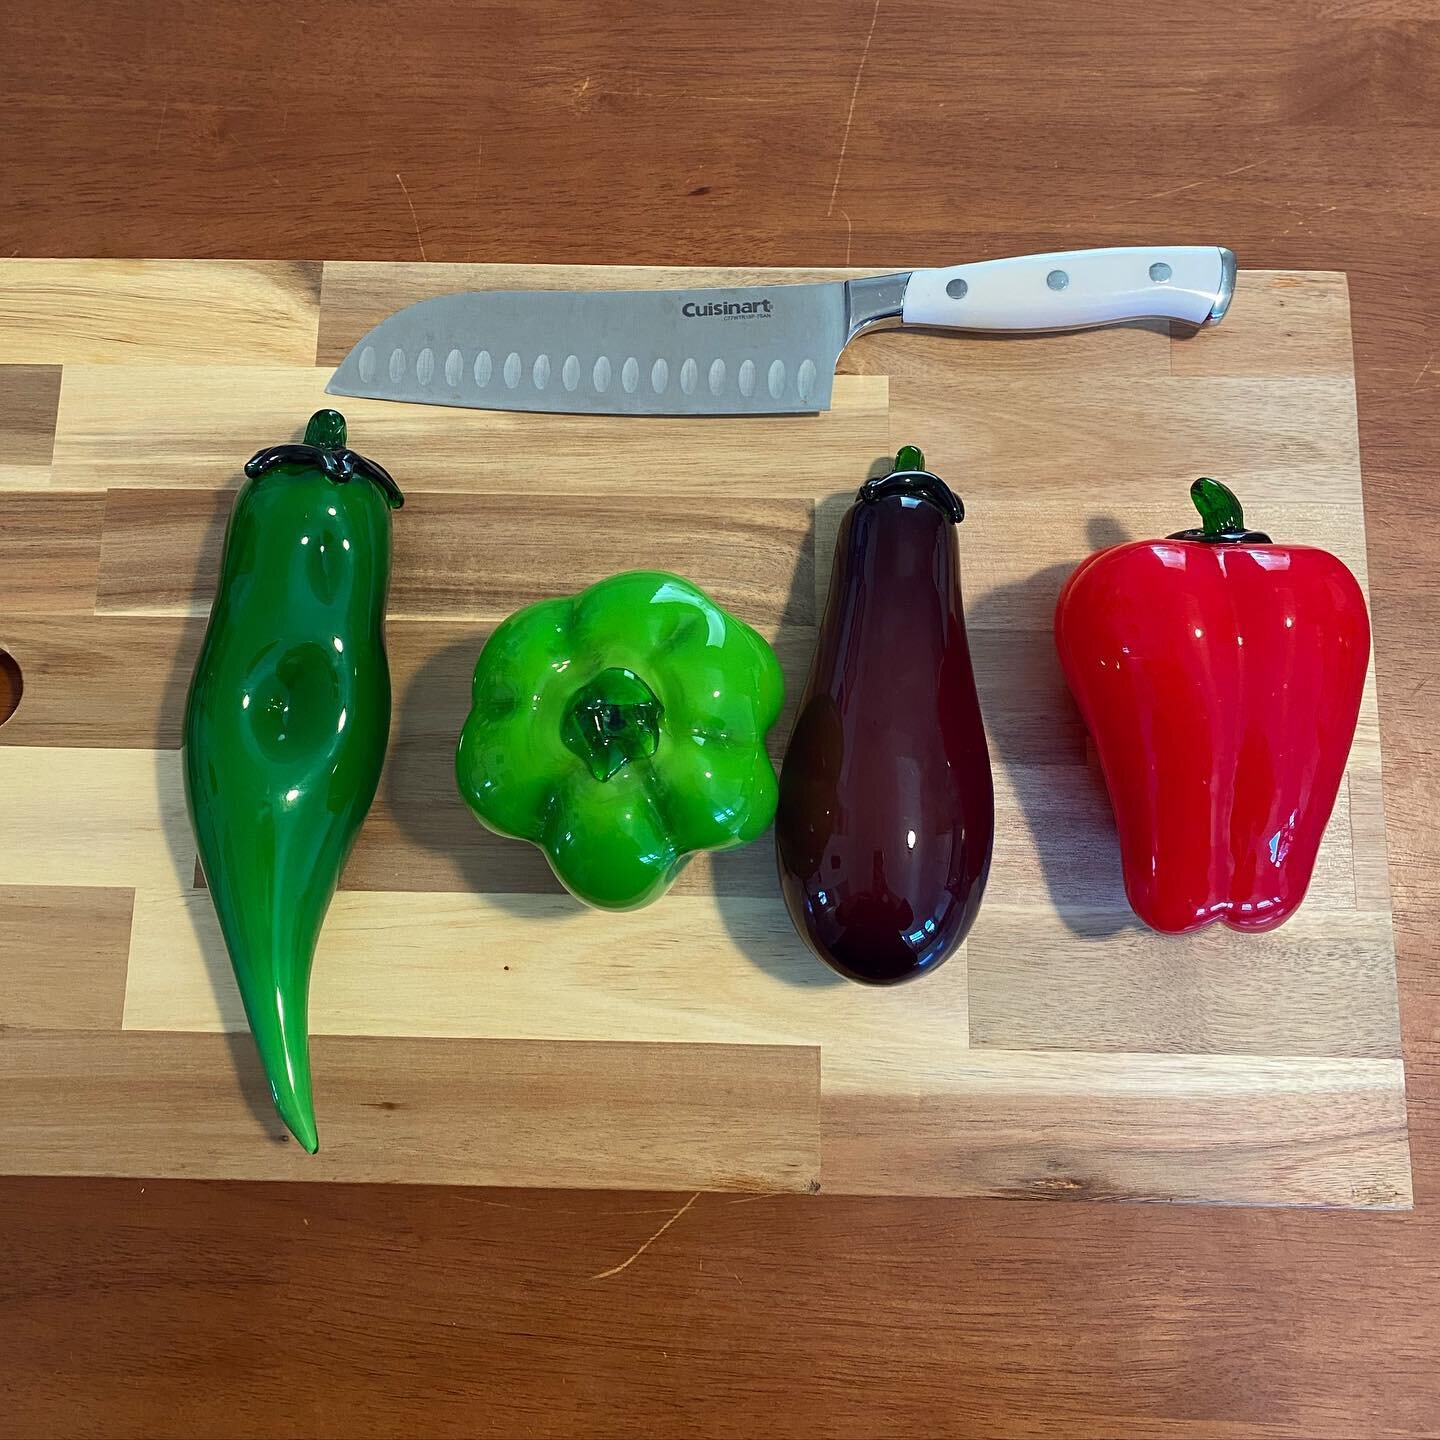 Chopping up some veggies. 
.
I made this set as a way to work on using molds (same technique I used on the pumpkin a few pictures back). The ridges on the two bell peppers are from the mold and same with most of the stems. Super happy with how these 